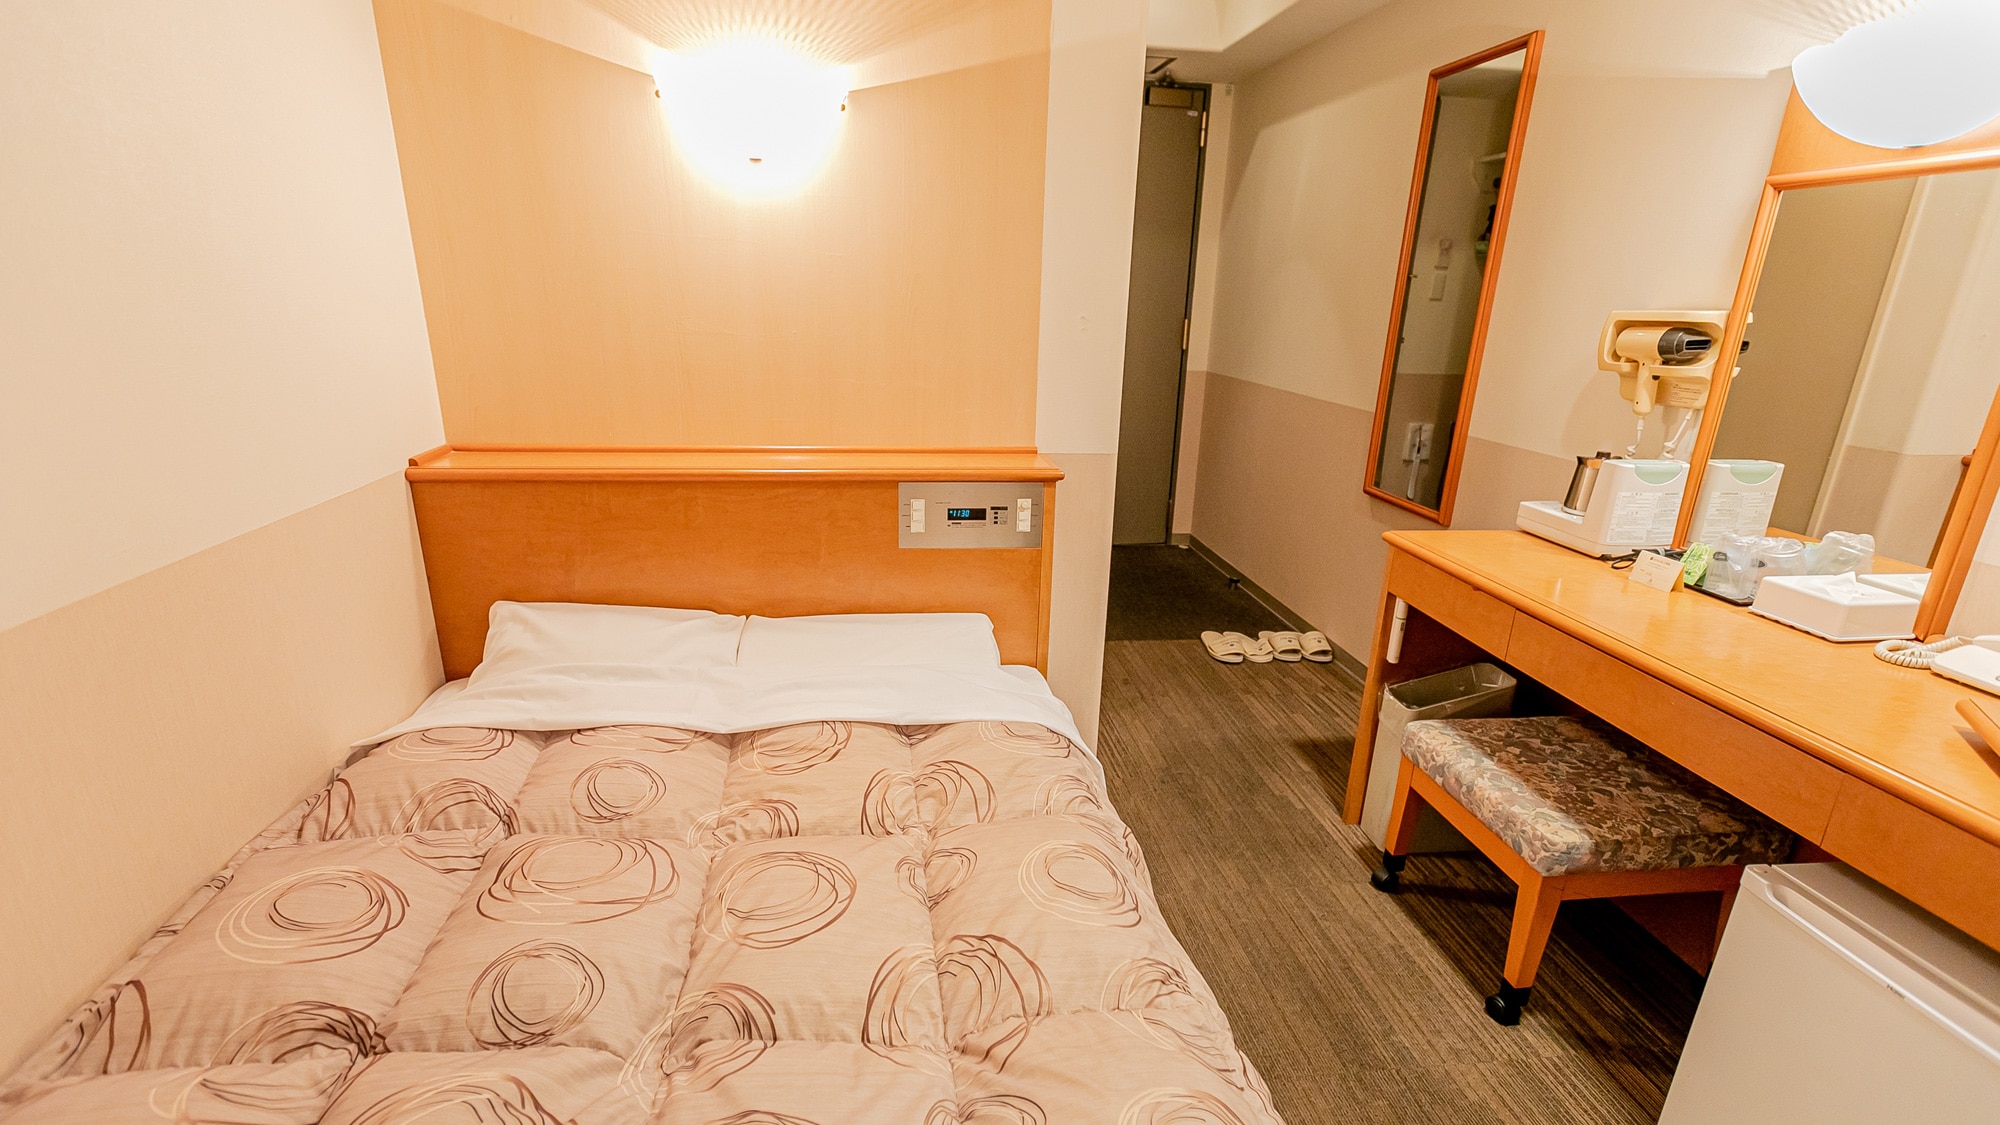 Single room for 2 people, semi-double bed